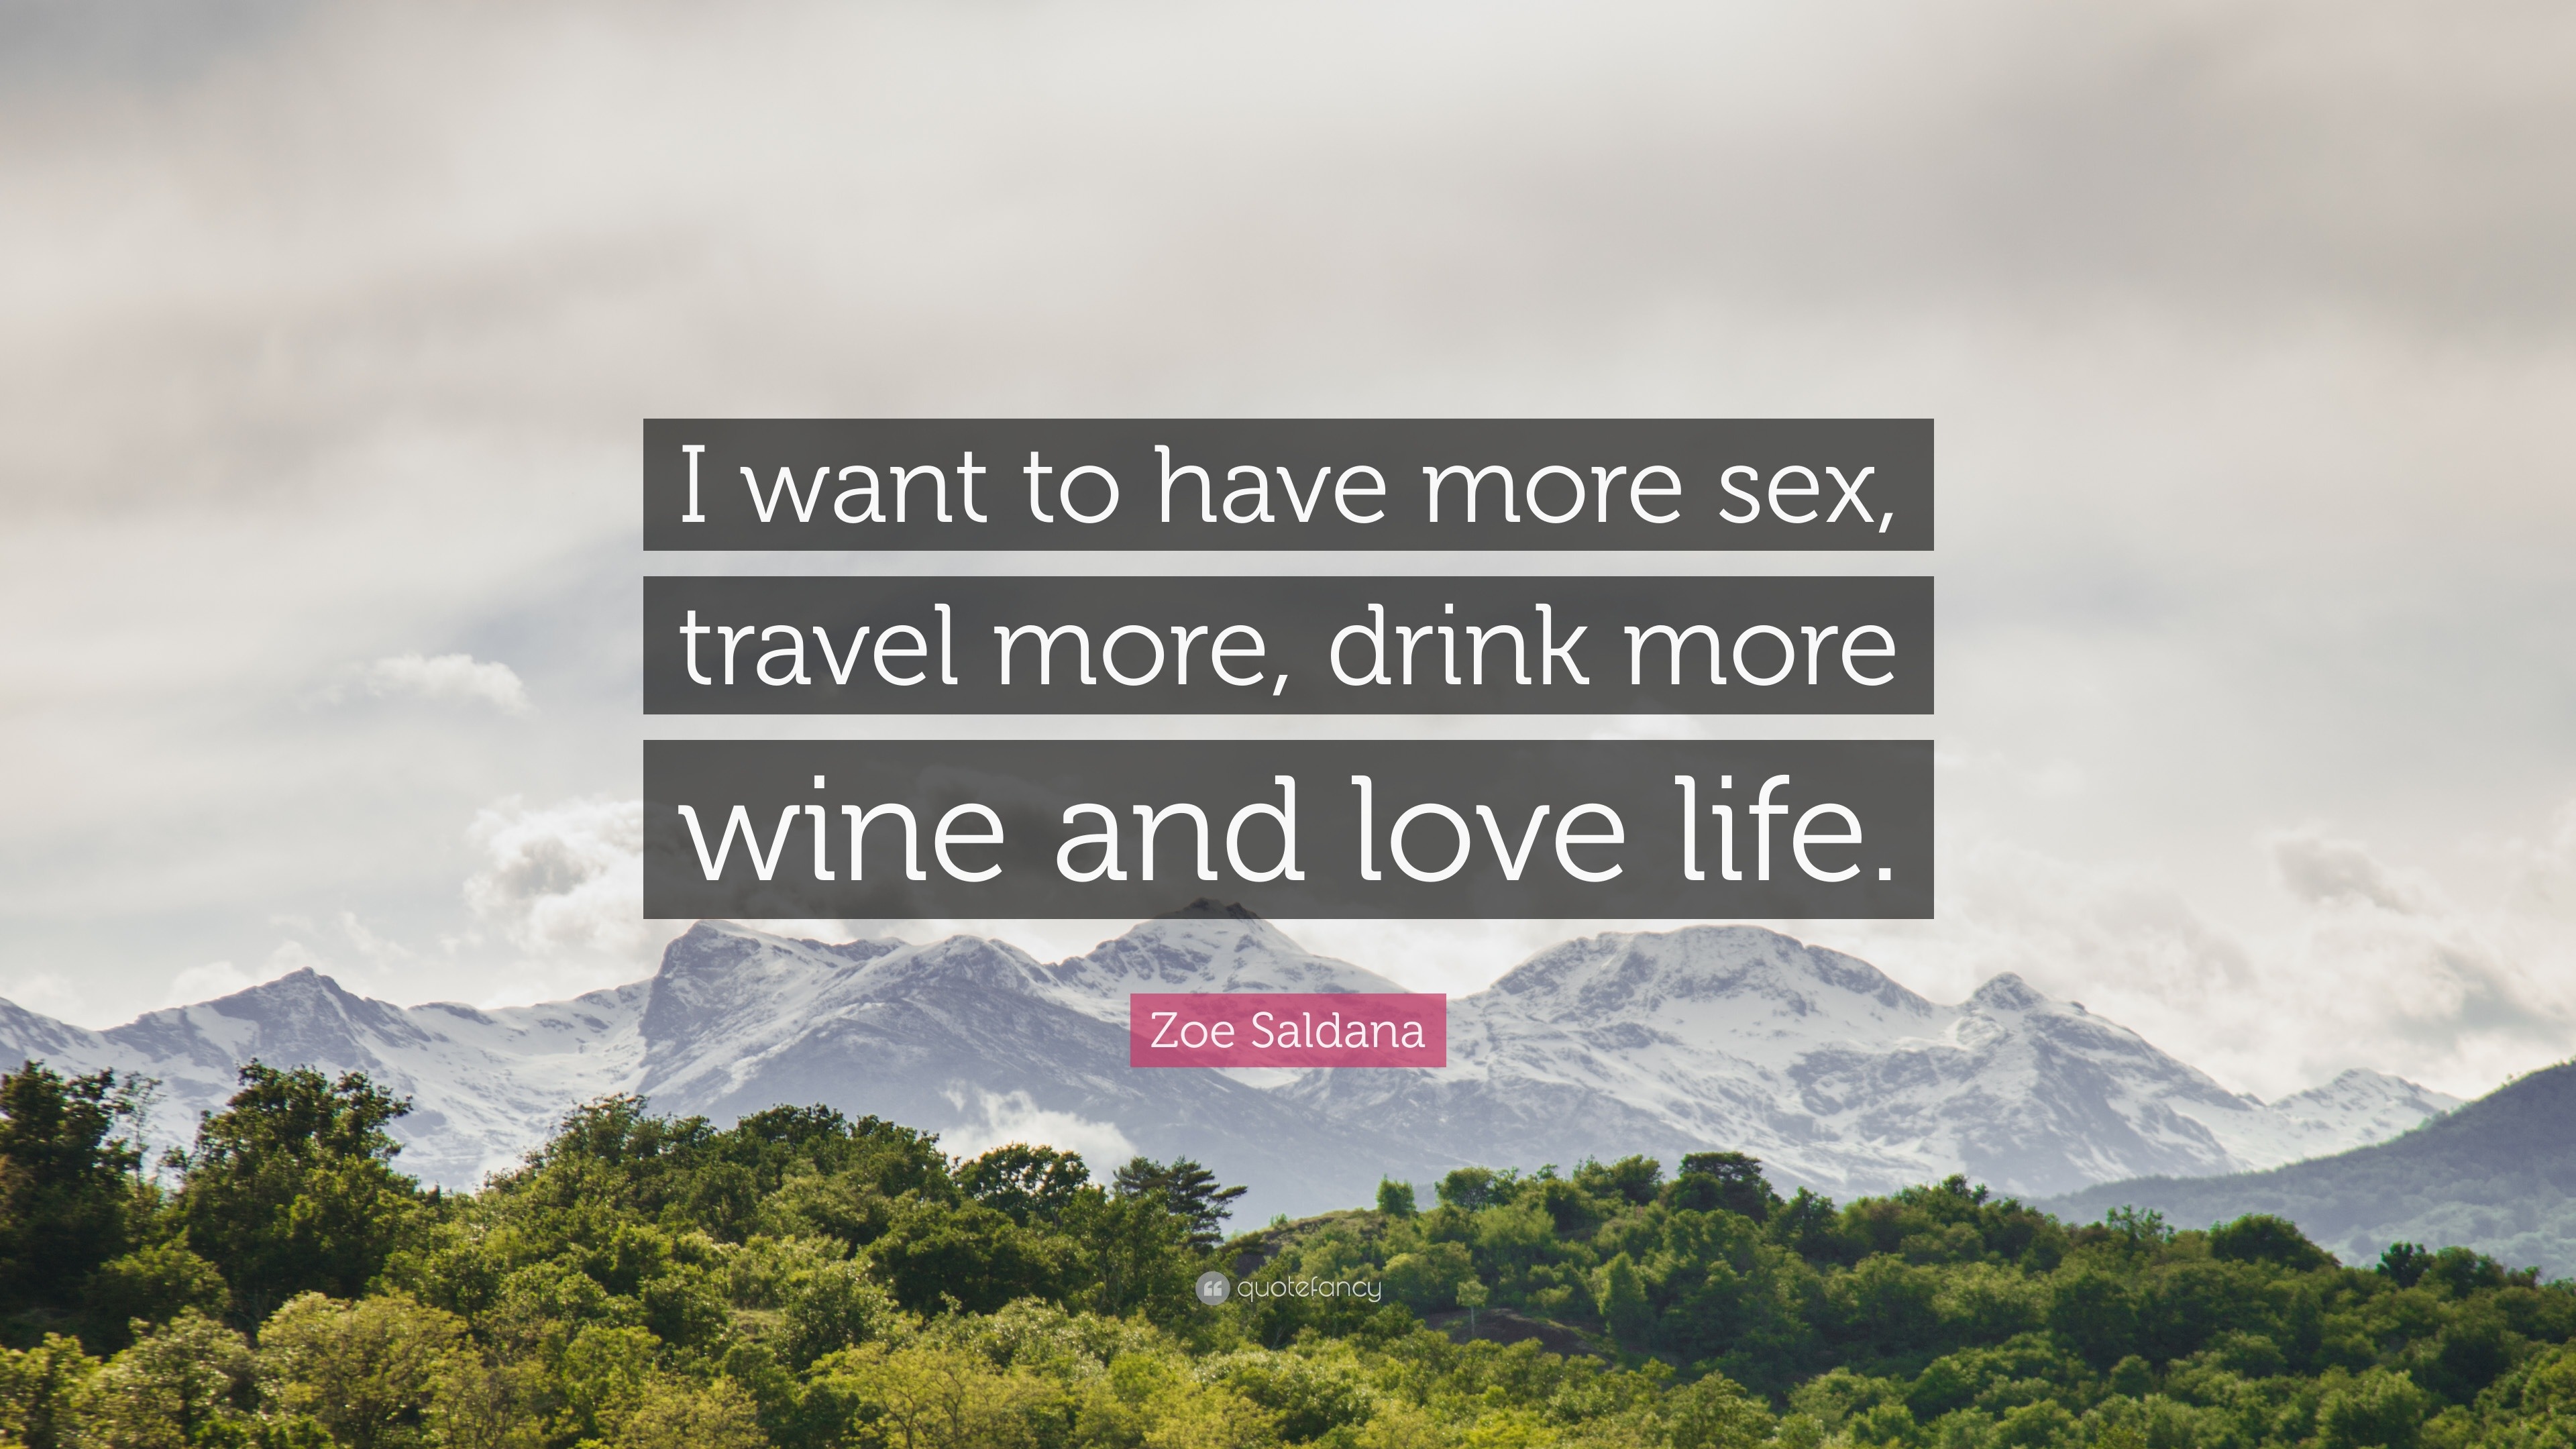 Zoe Saldana Quote “I want to have more travel more drink